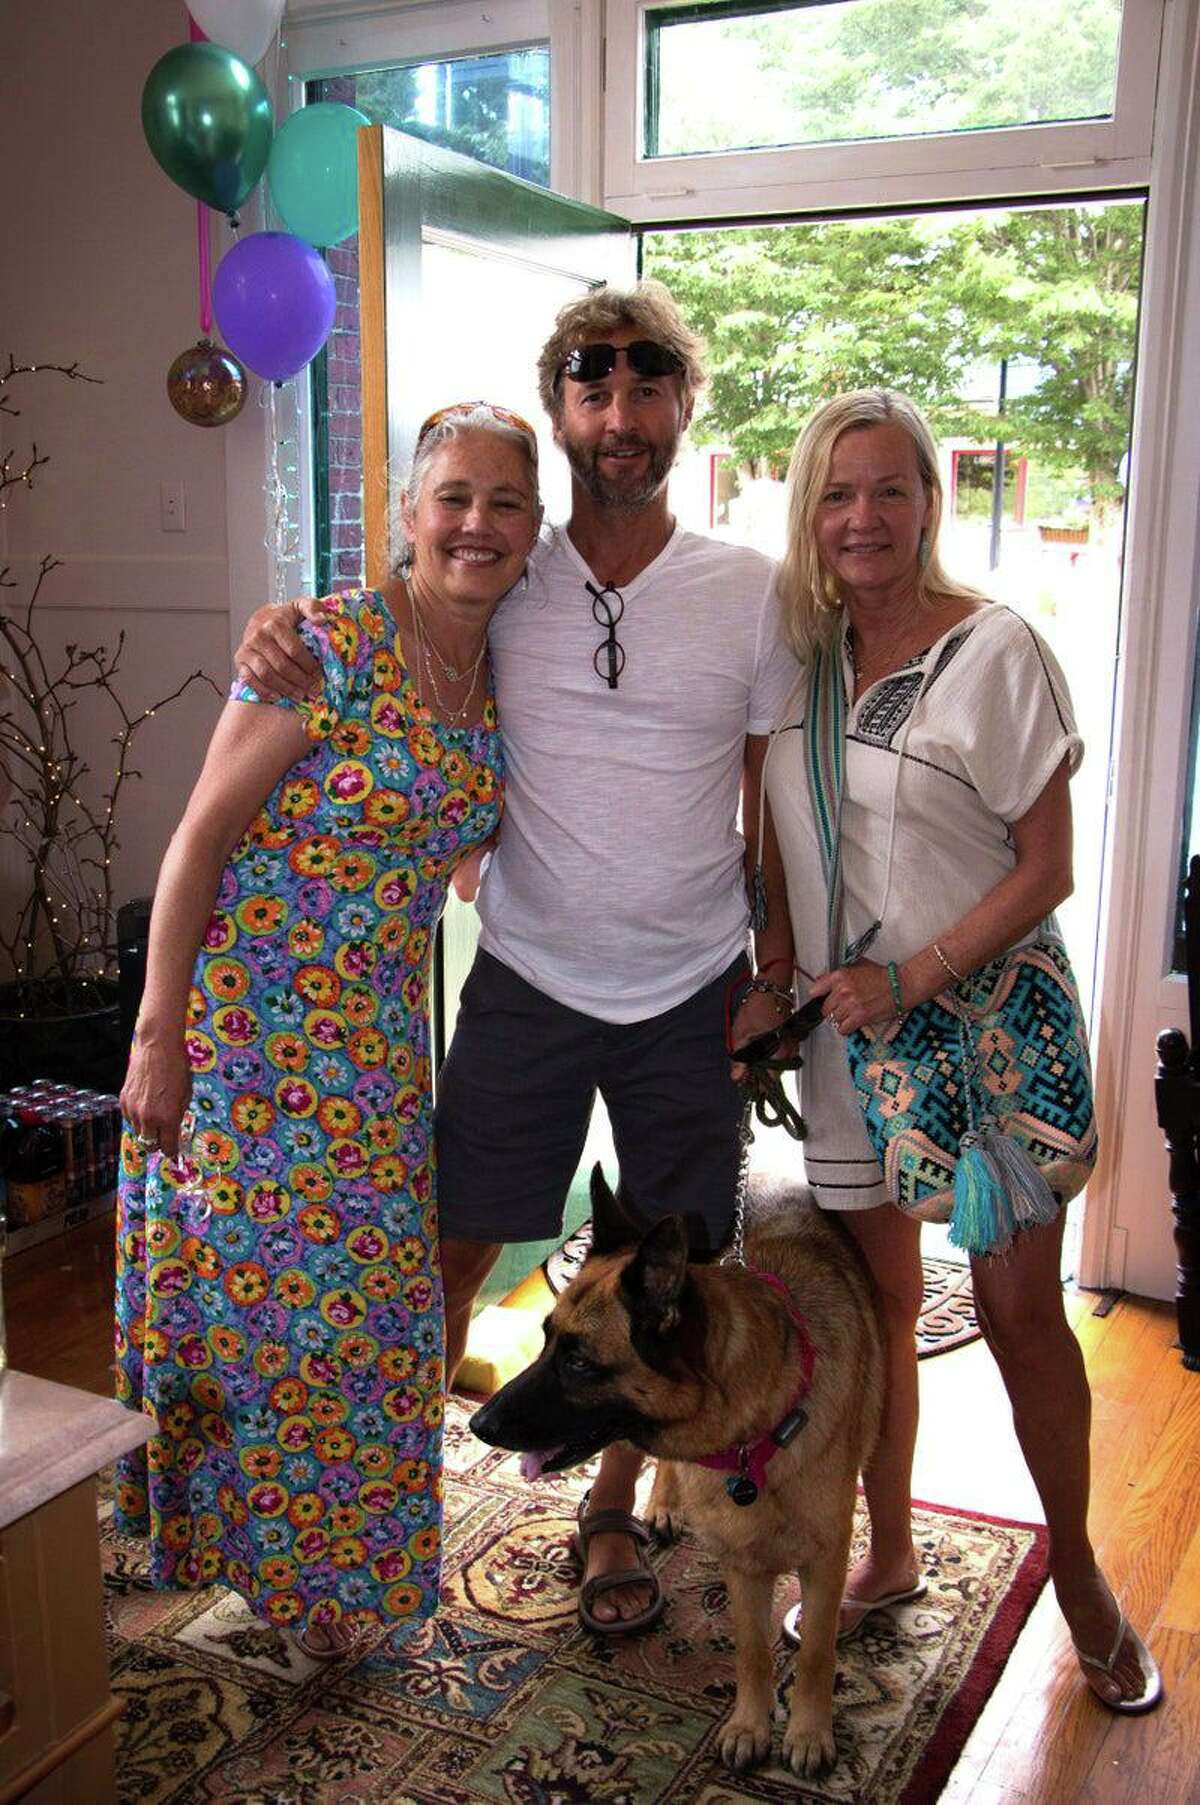 Healing Nest, a new wellness center, opened June 26 in Norfolk. From left are owner Dianna Hofer, her brother David Mullane and his wife, Kristin Scott, with their dog Lua.